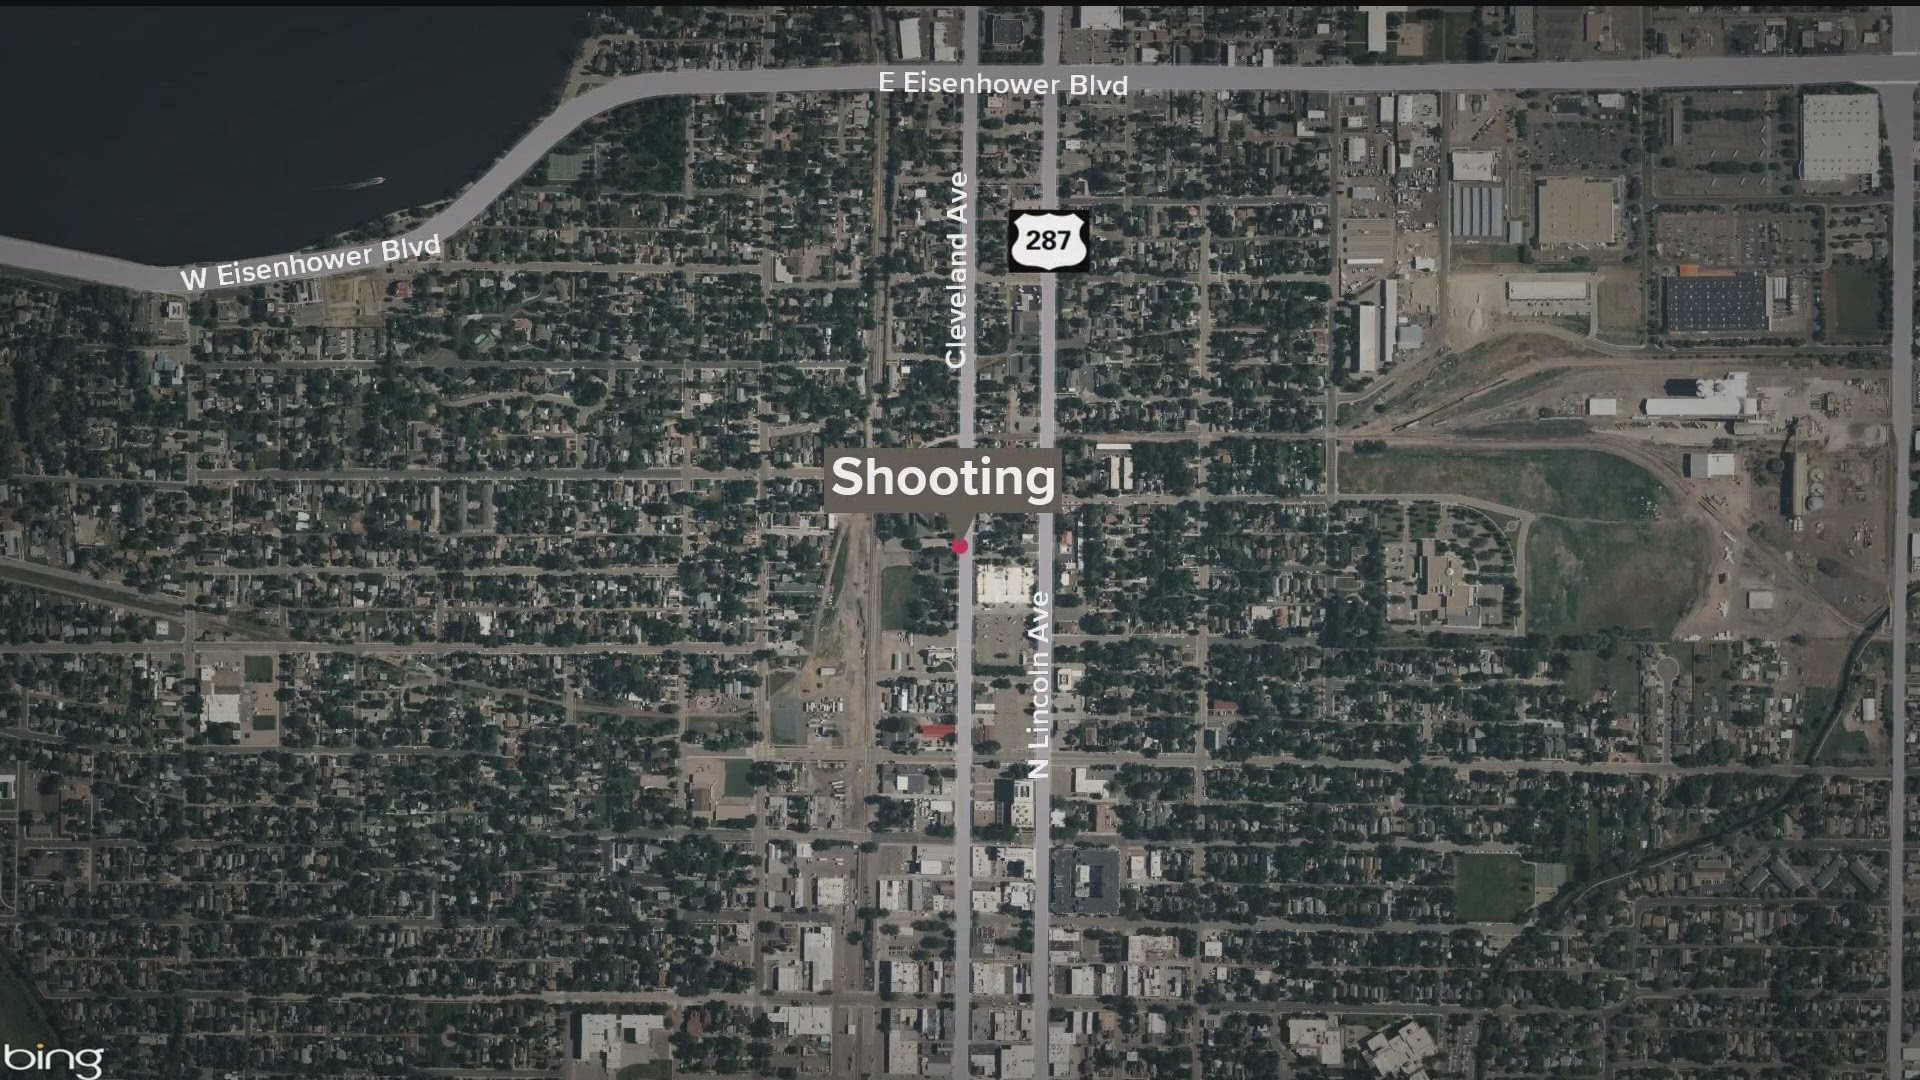 The shooting occurred Wednesday night near the intersection of East 8th St. and North Cleveland Avenue. One man was injured and taken to a local hospital.